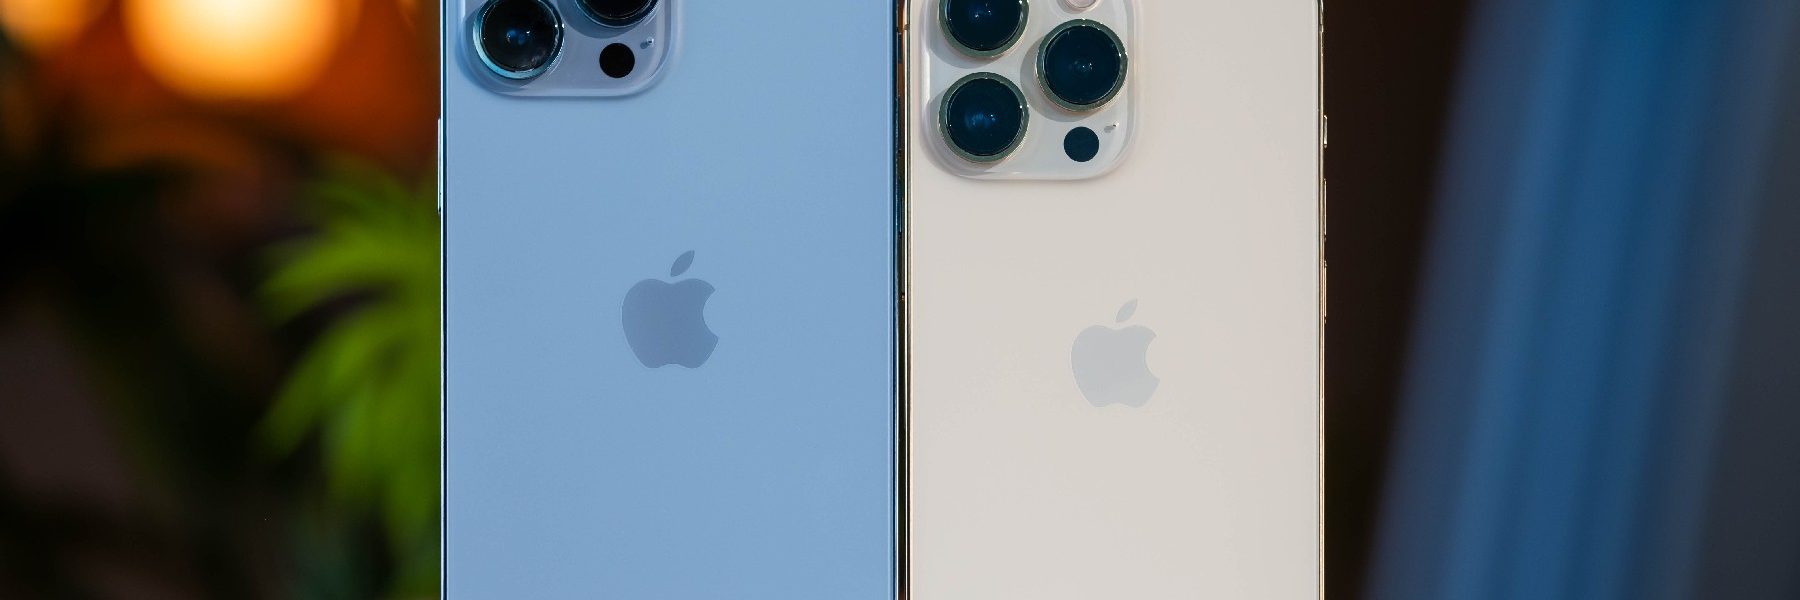 The Important Difference Between Apple Iphone 13 Pro Max and Google